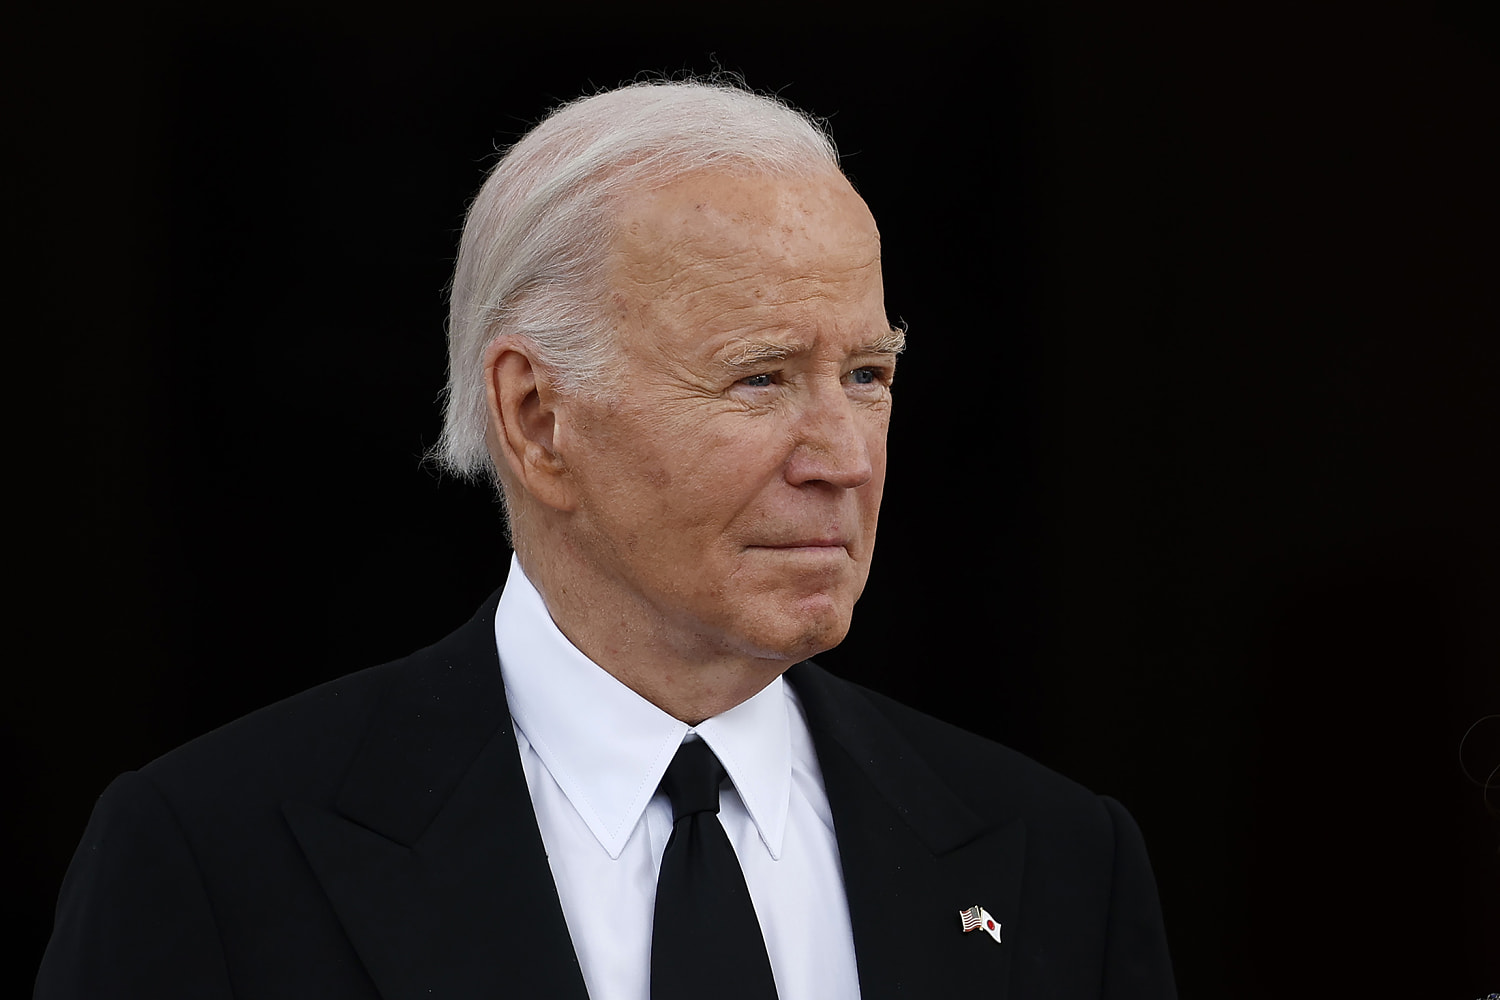 Read Biden’s letter to the nation stepping aside